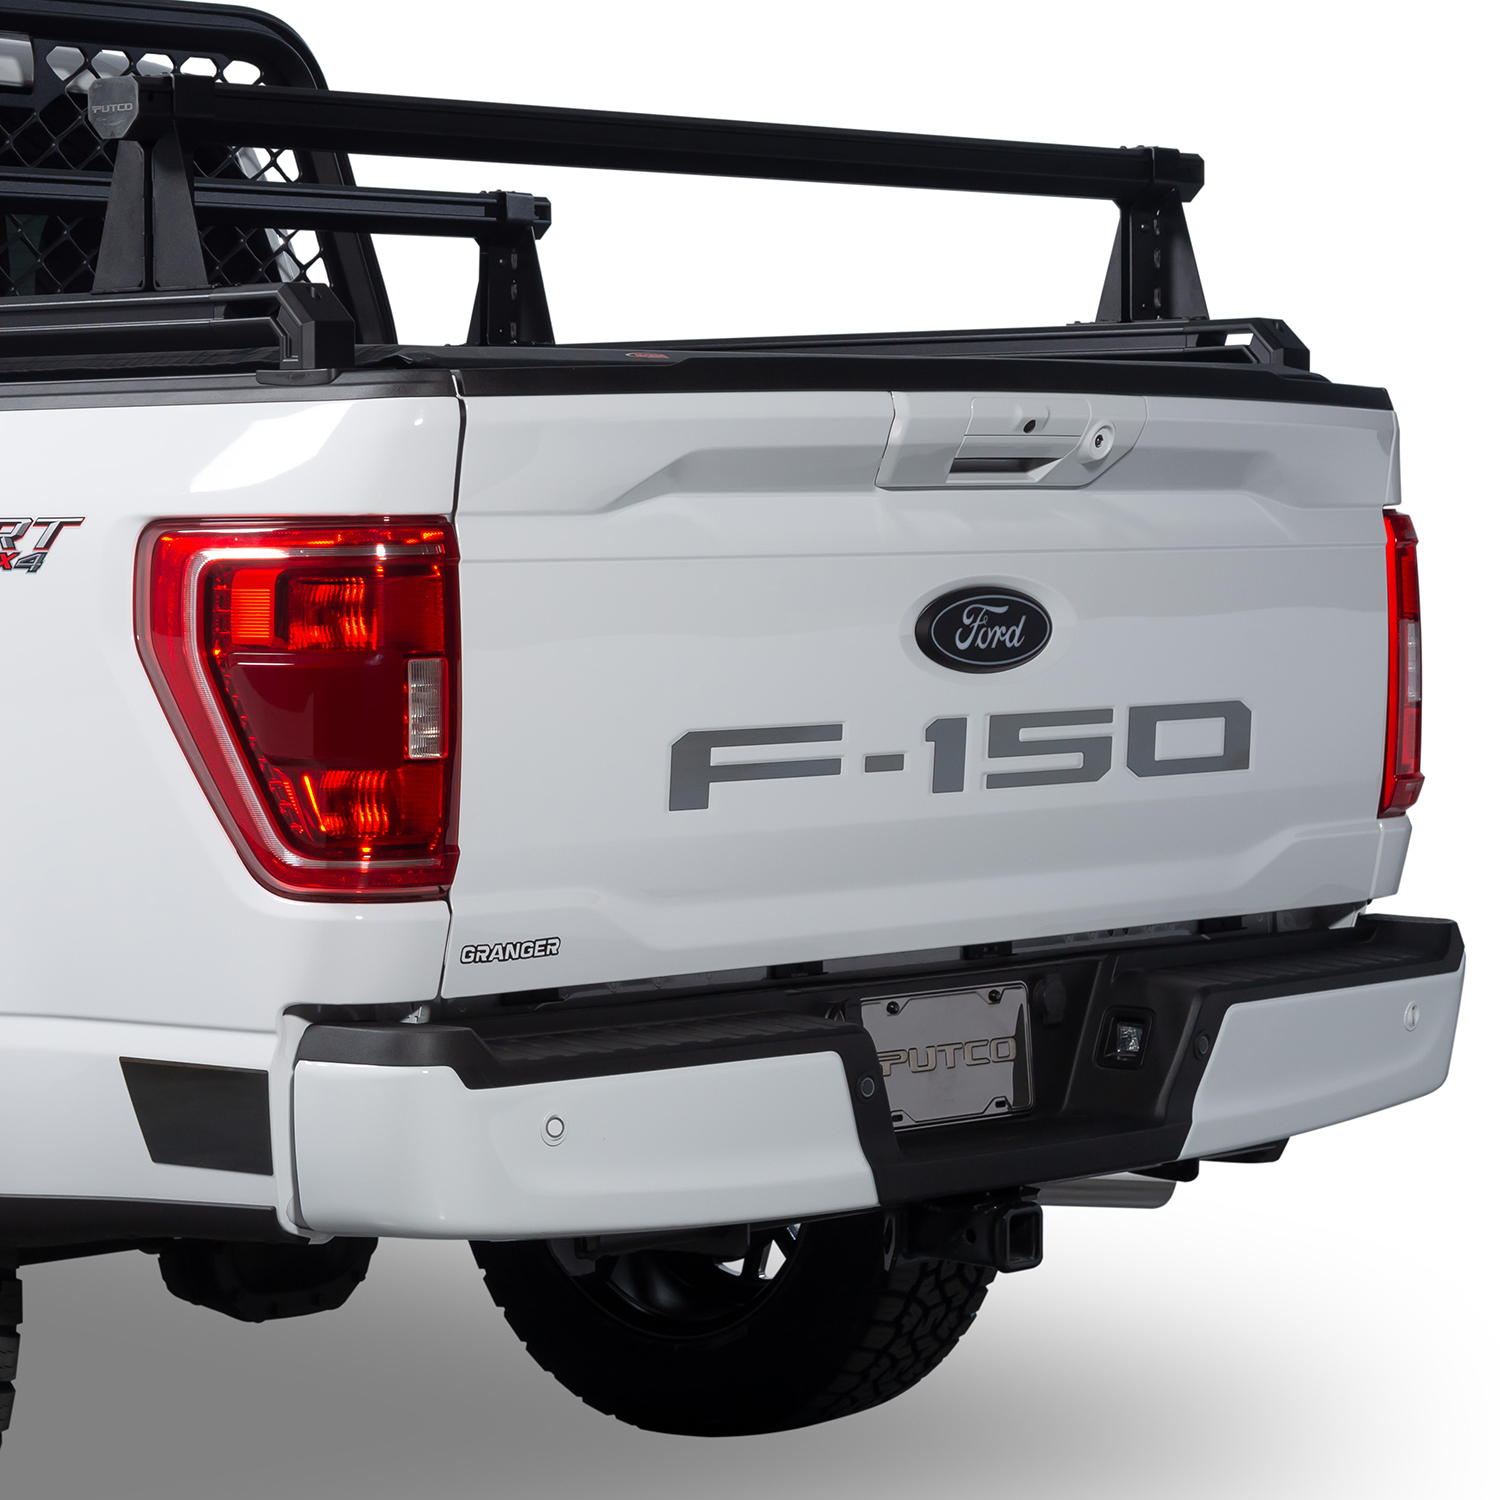 55559FD-X - Putco Ford F-150 Tailgate Lettering Kit - Stainless